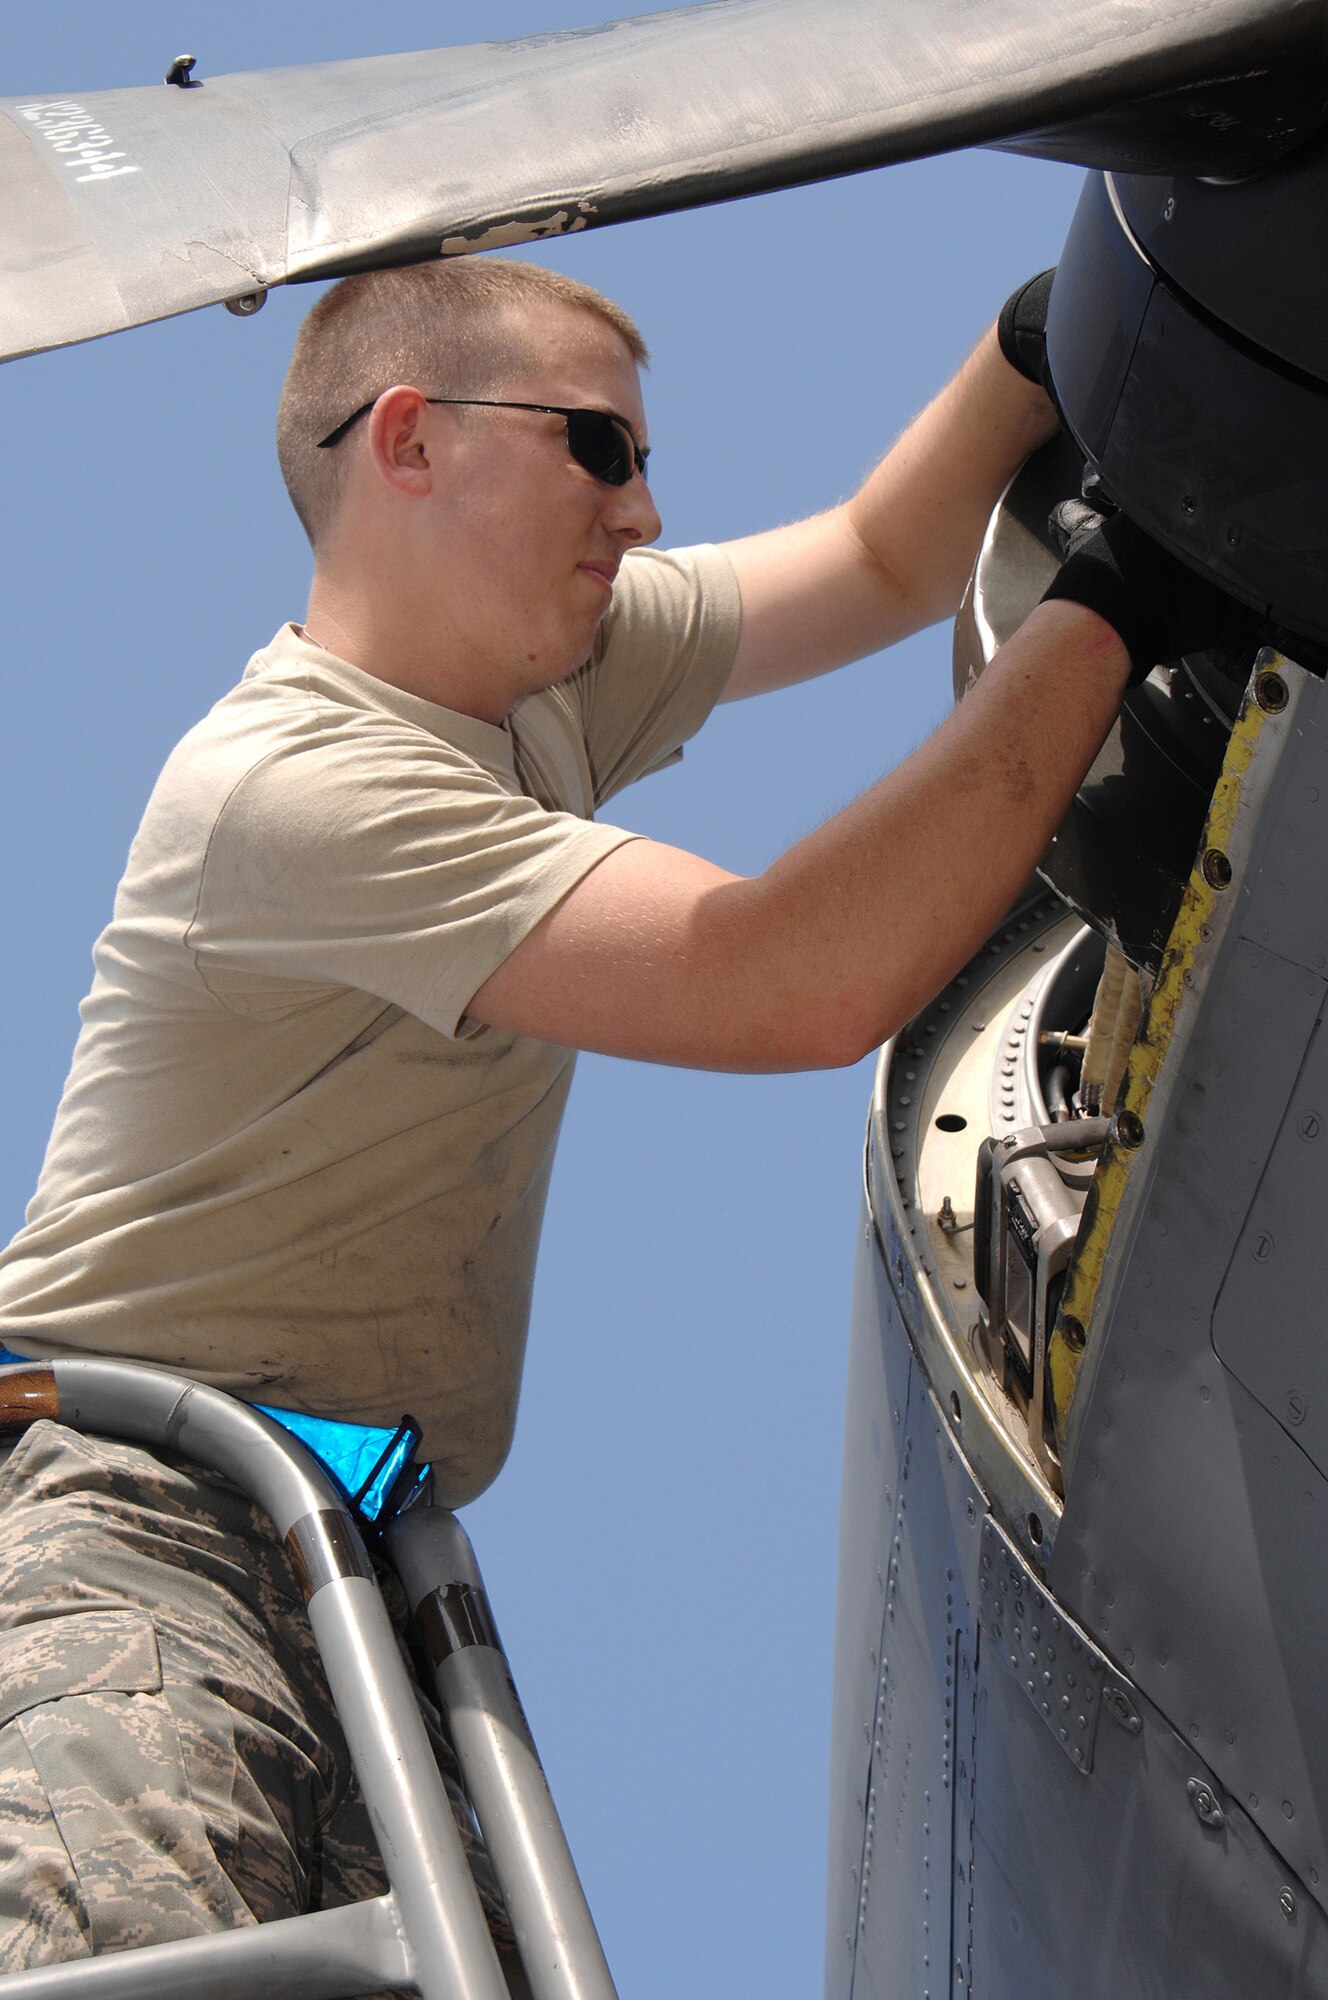 UTAPAO, Thailand - Airman 1st Class Stuart Coble, performs a propeller service inspection on a U.S. Air Force C-130 Hercules after its arrival from delivering relief supplies in Burma May 14. Airman Coble is with the 374th Aircraft Maintenance Squadron from Yokota Air Base, Japan. The Airmen are deployed in support of Operation Caring Response. (USAF photo by Senior Airman Sonya Croston)